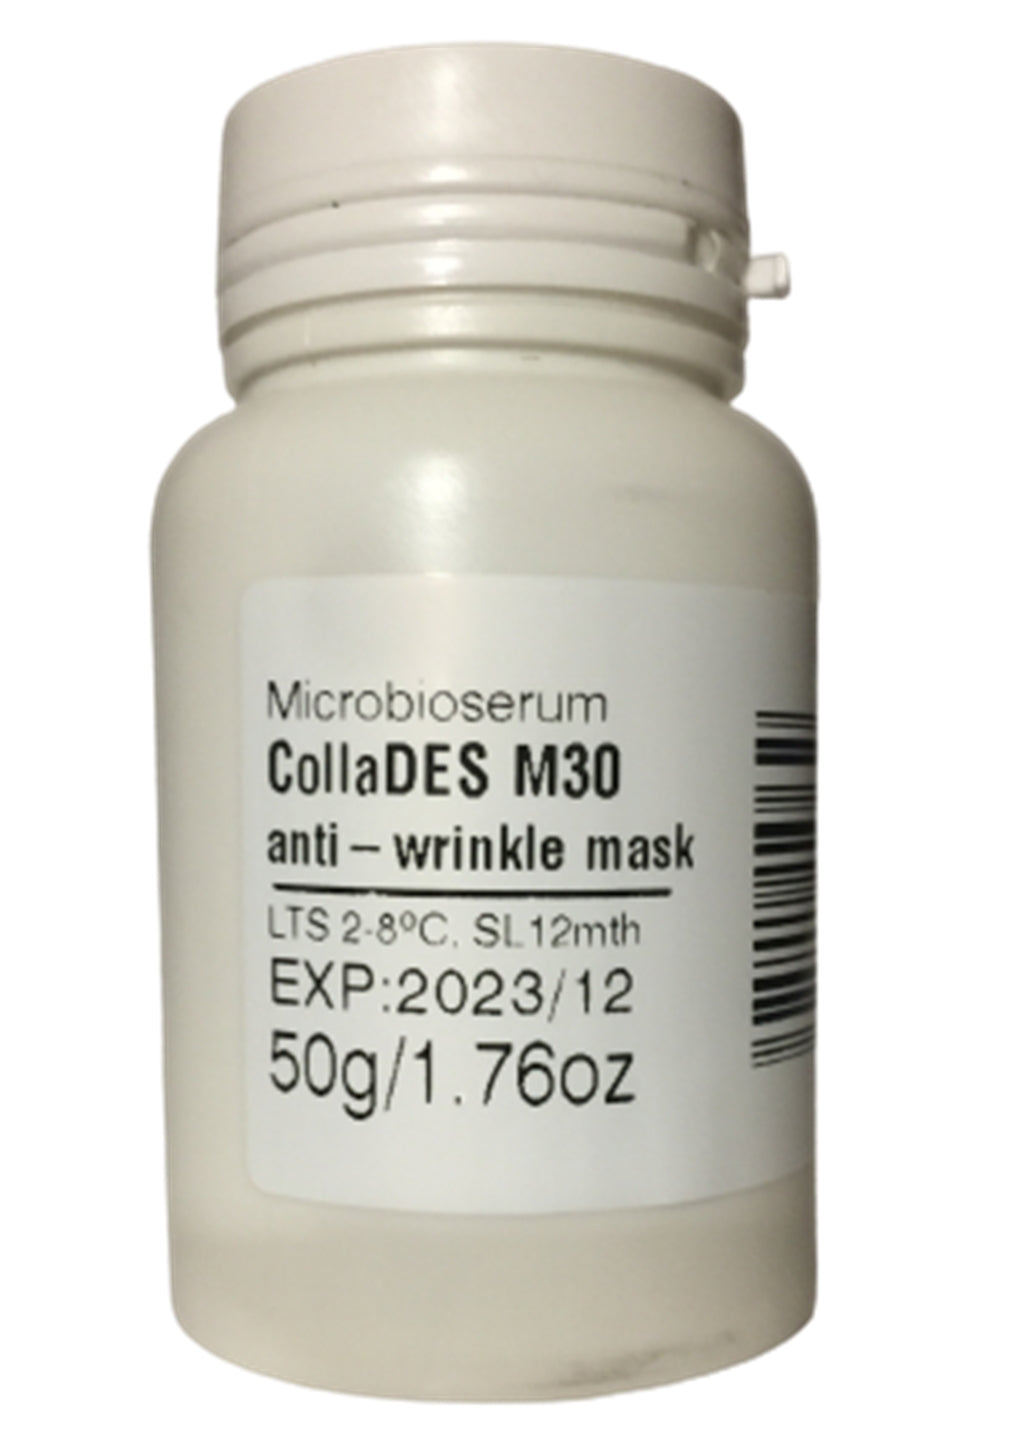 CollaDES M30 - anti-wrinkle mask (after 30 years)